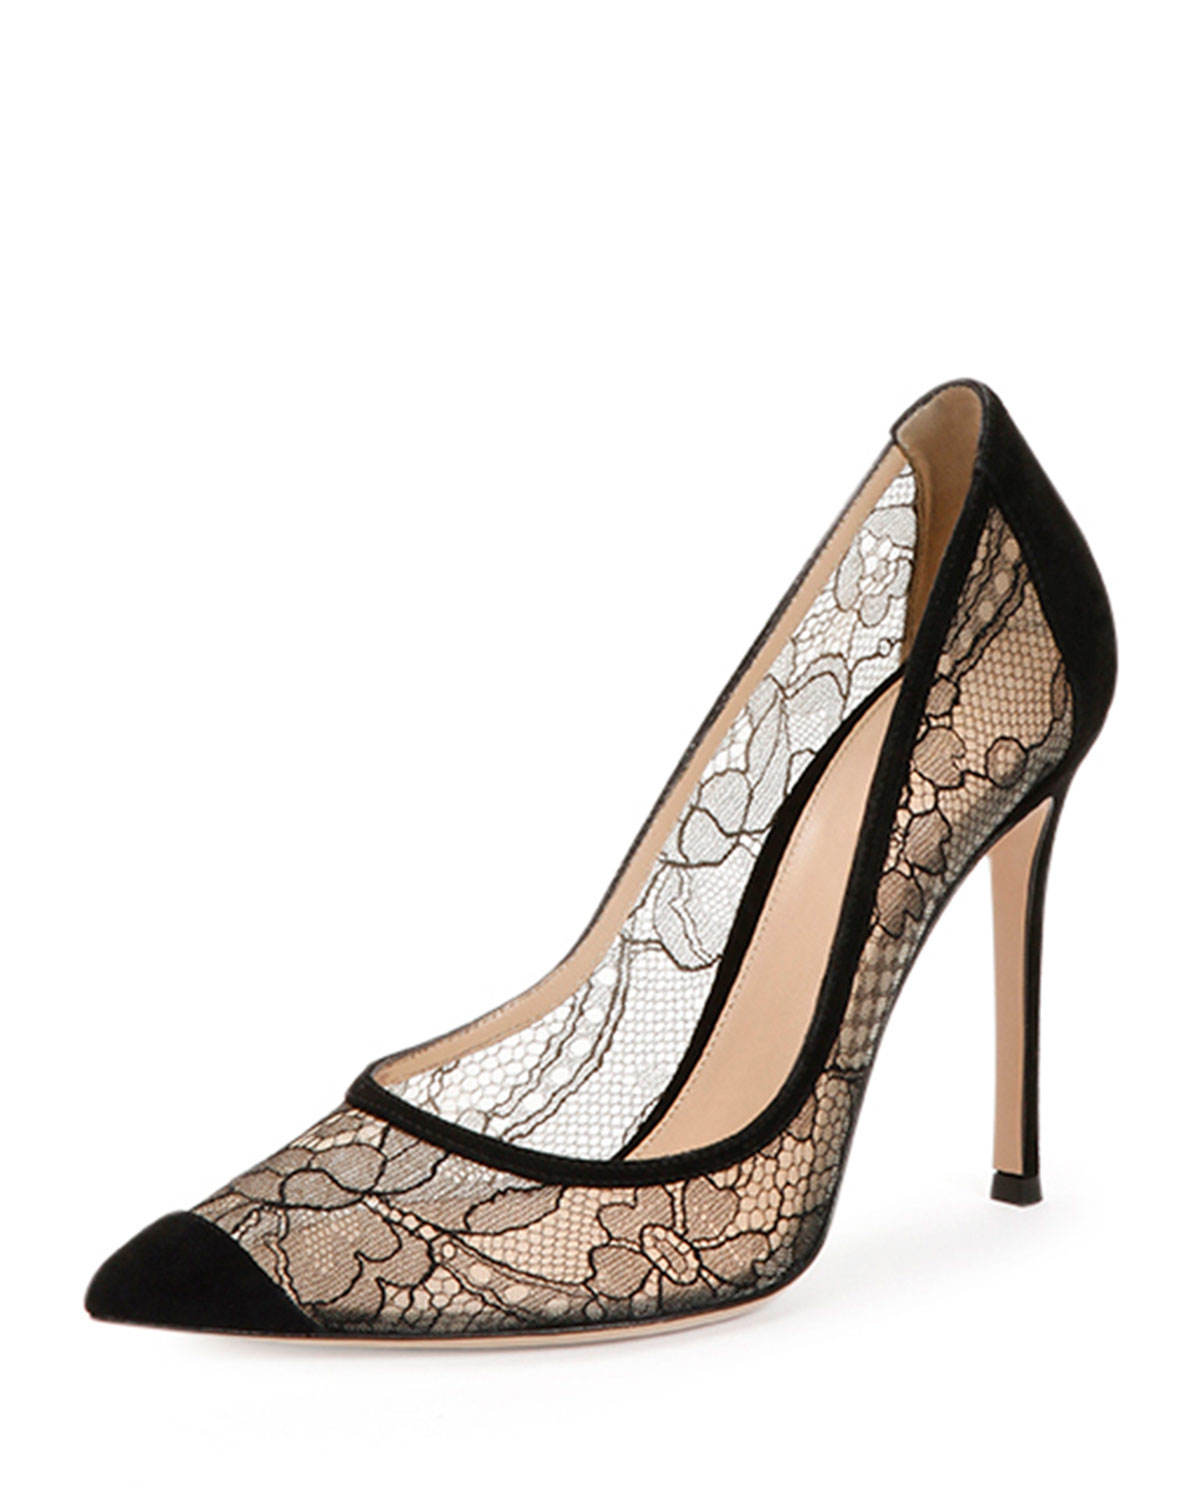 Lyst - Gianvito Rossi Pointed Cap-Toe Lace Pump in Black